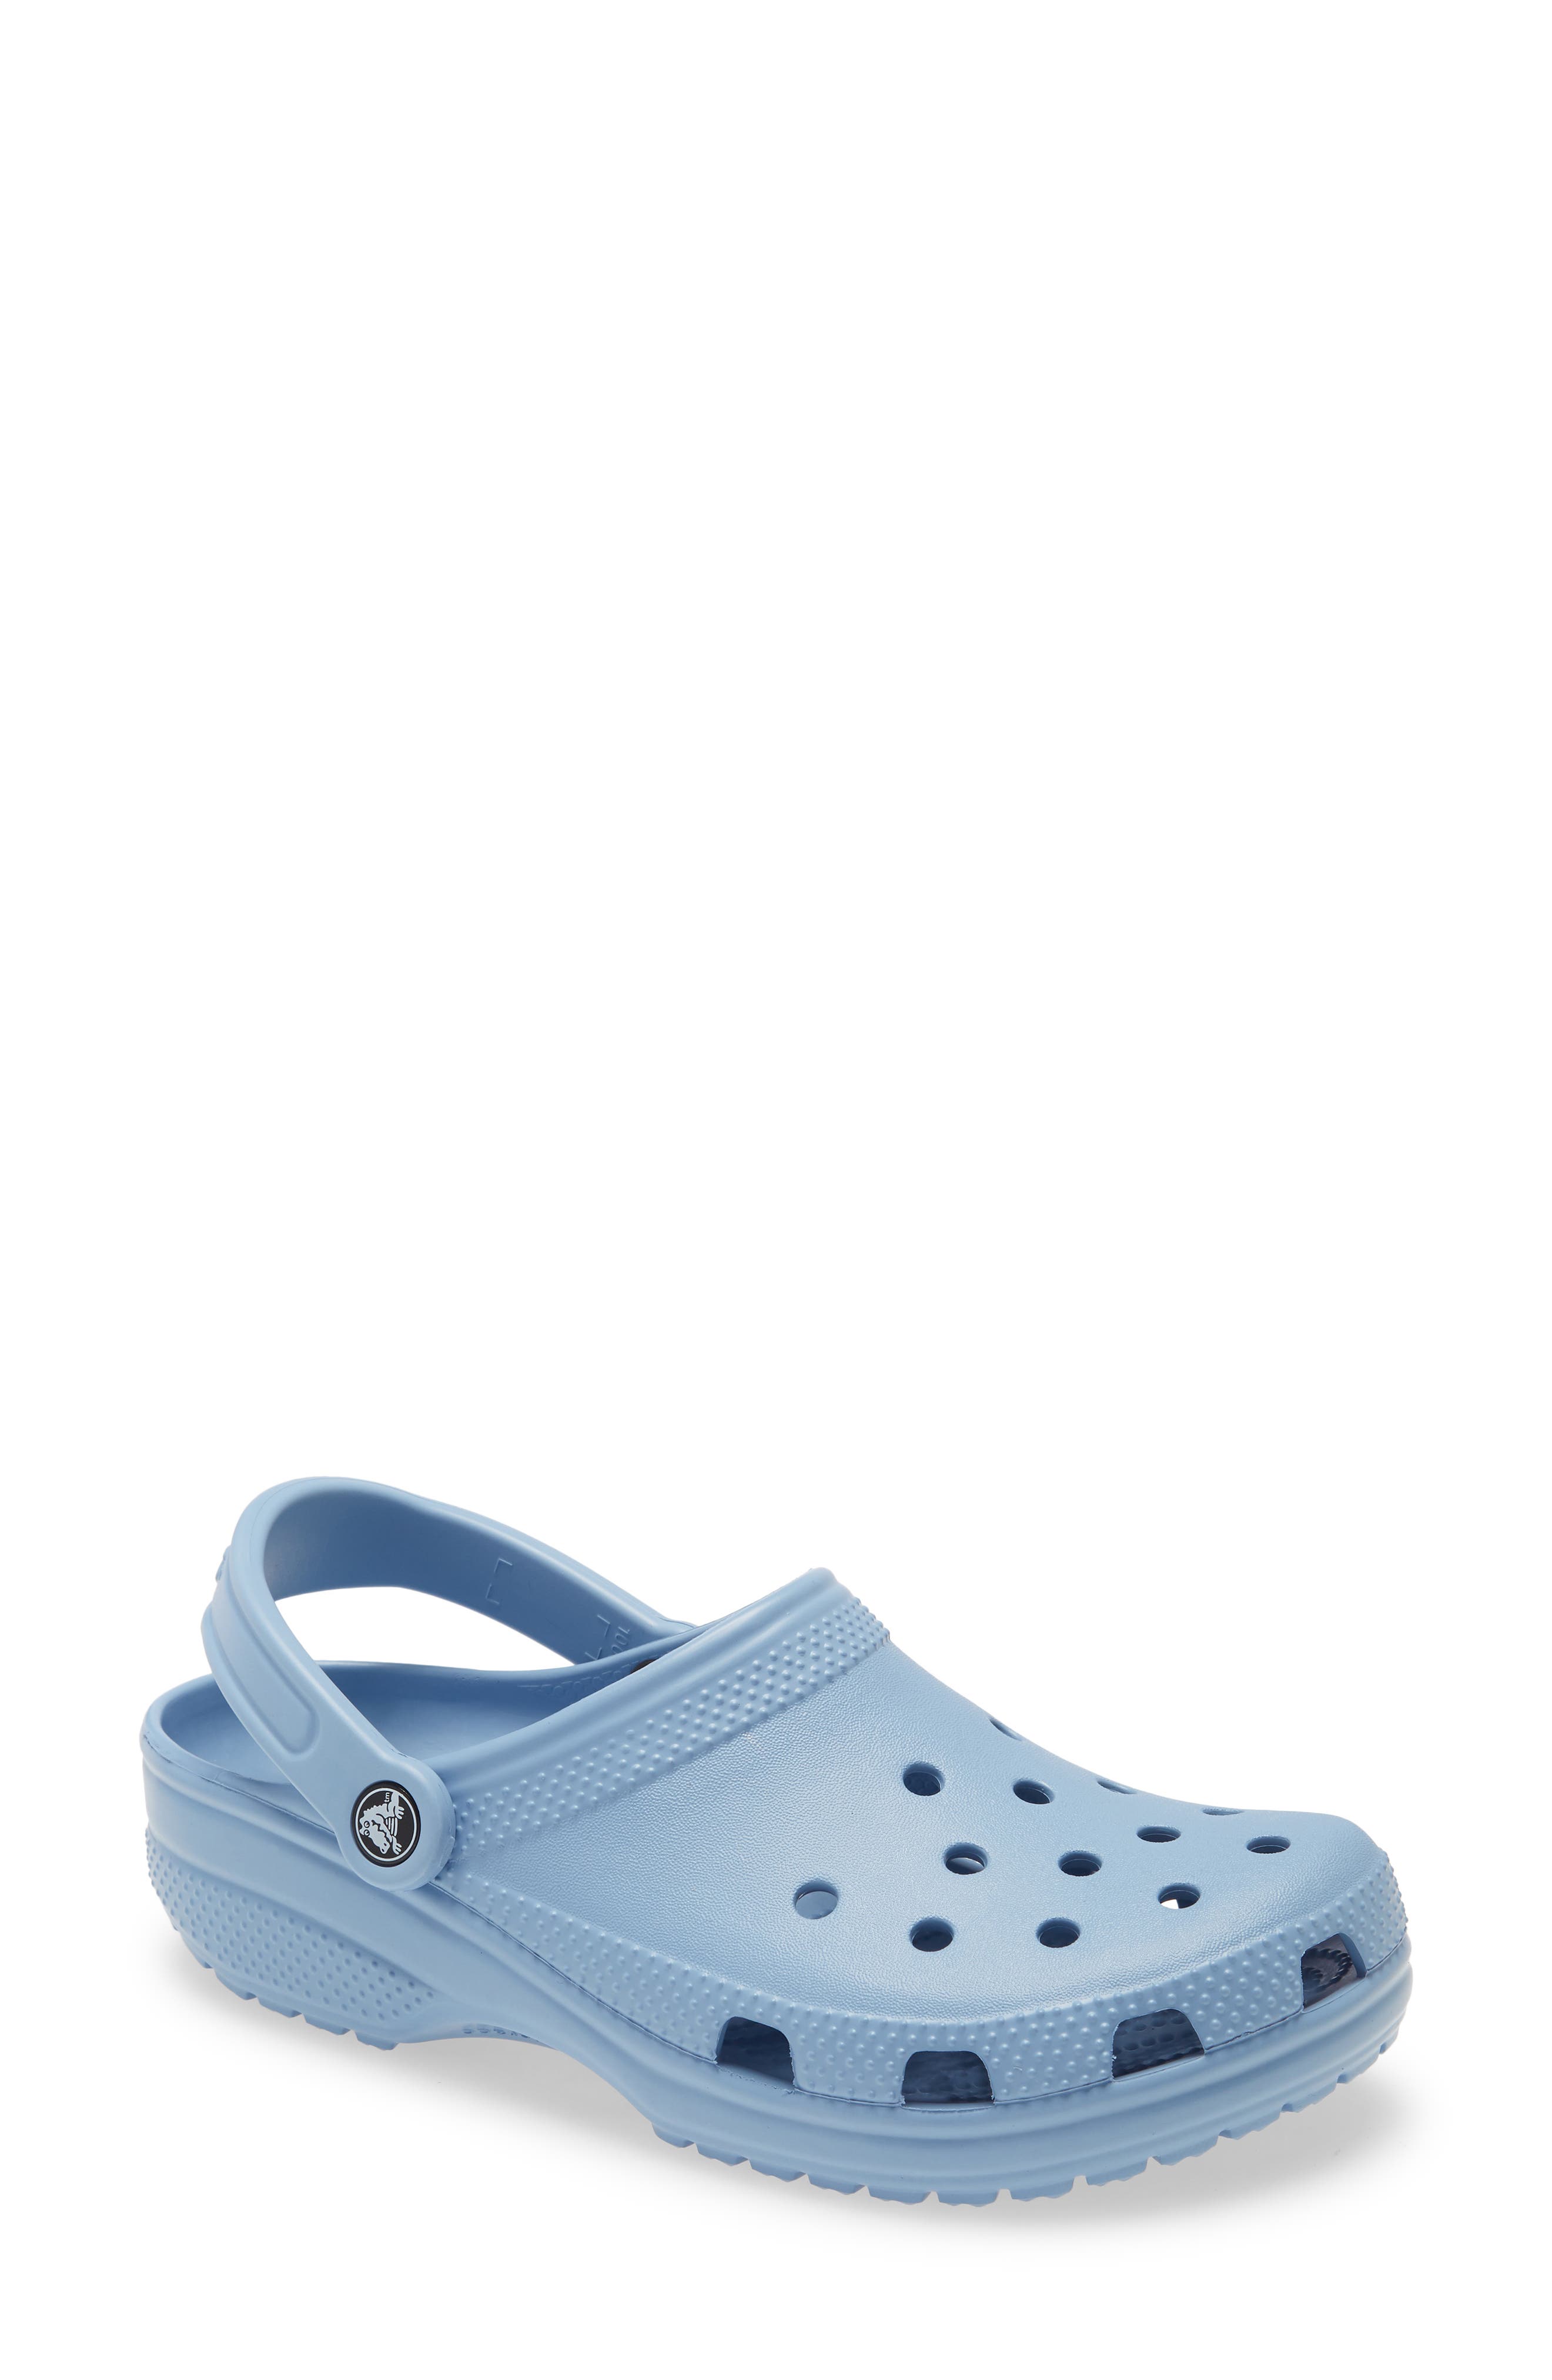 baby blue shoes for men